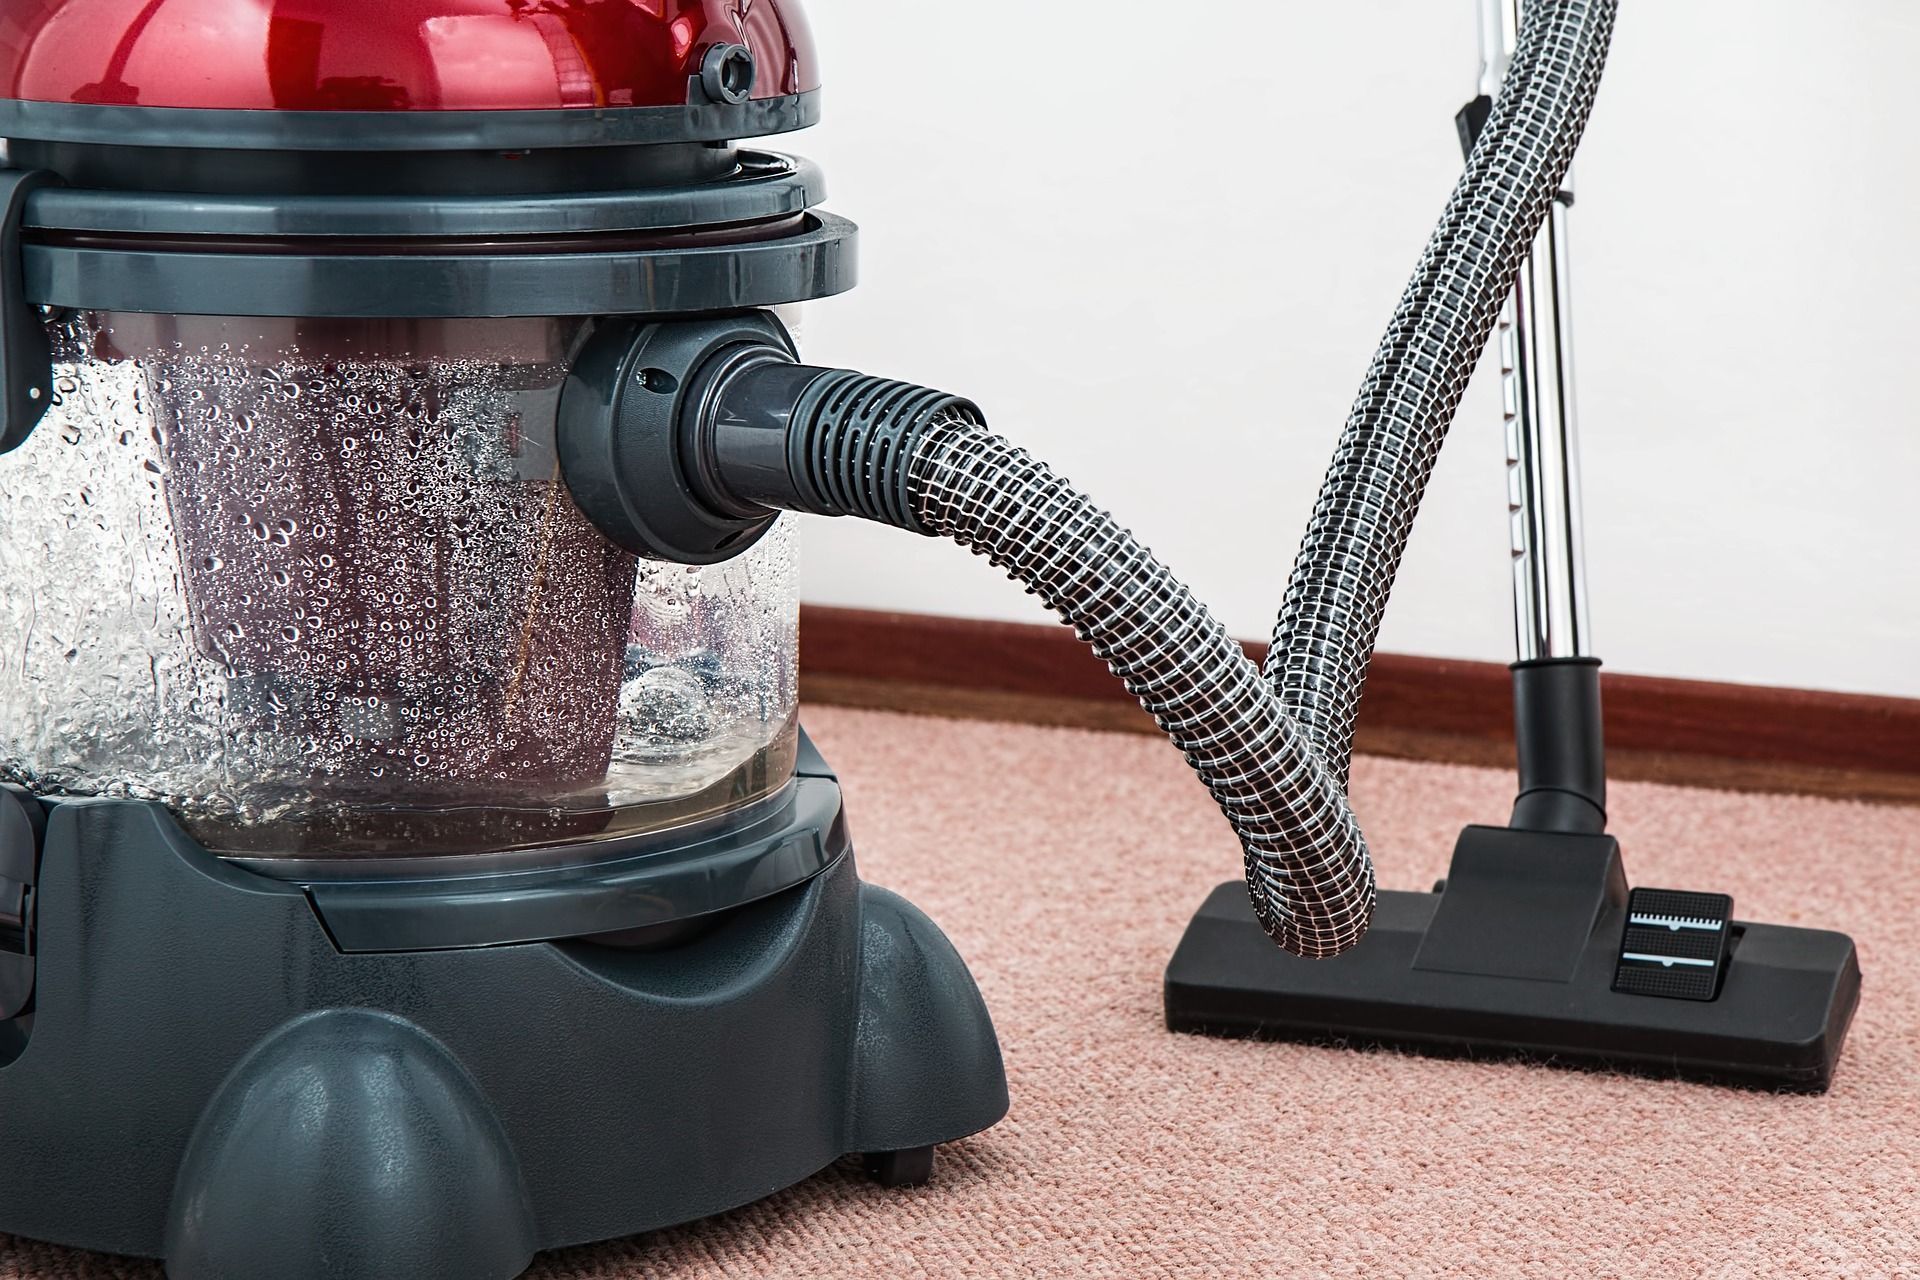 carpet shampooing, cleaning, odor removal, mold, mildew